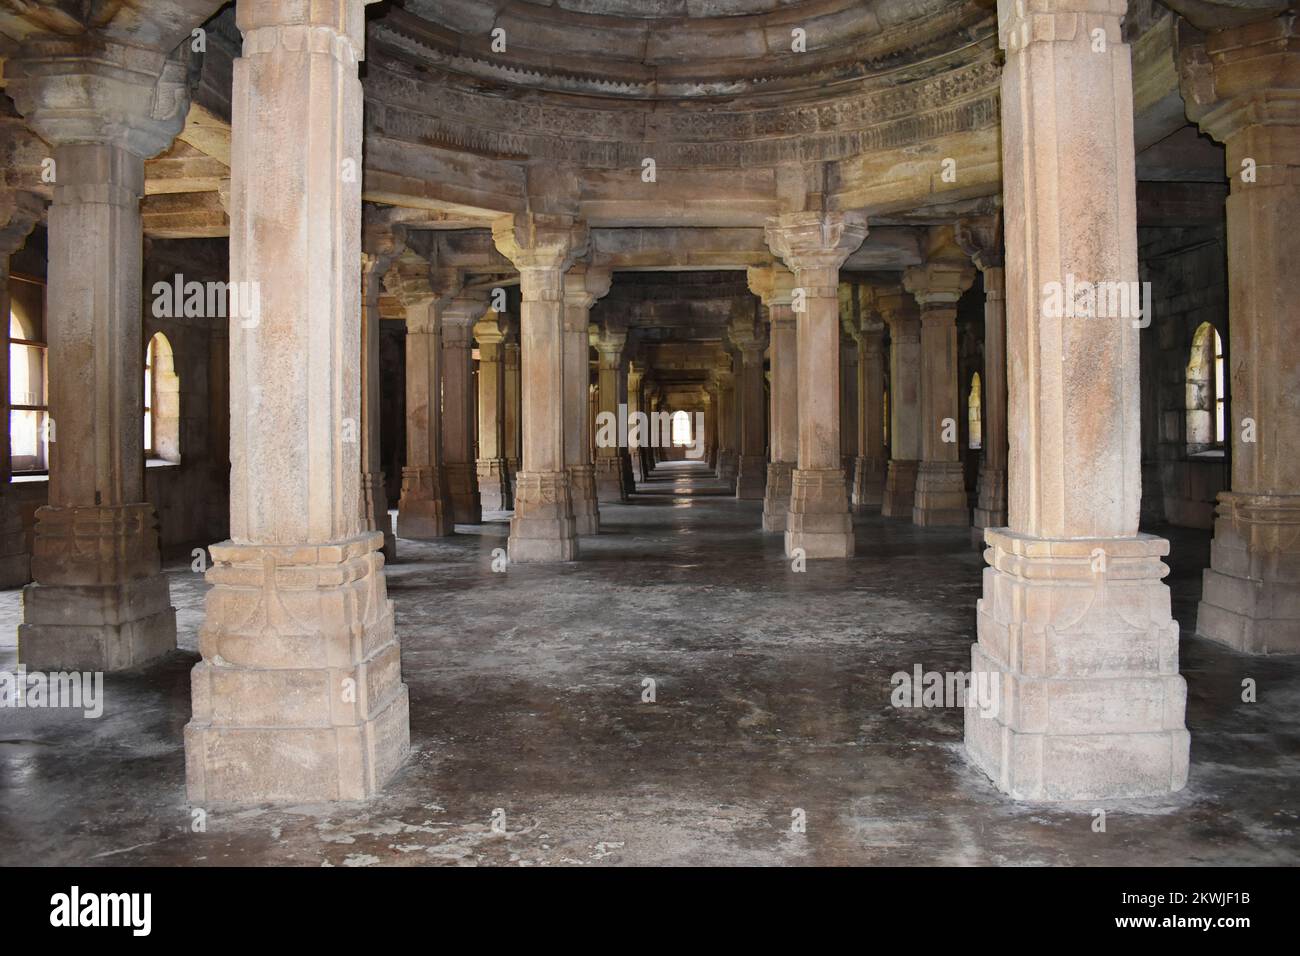 Shaher ki Masjid, interior view with carvings on Pillars and Dome, built by Sultan Mahmud Begada 15th - 16th century. A UNESCO World Heritage Site, Gu Stock Photo